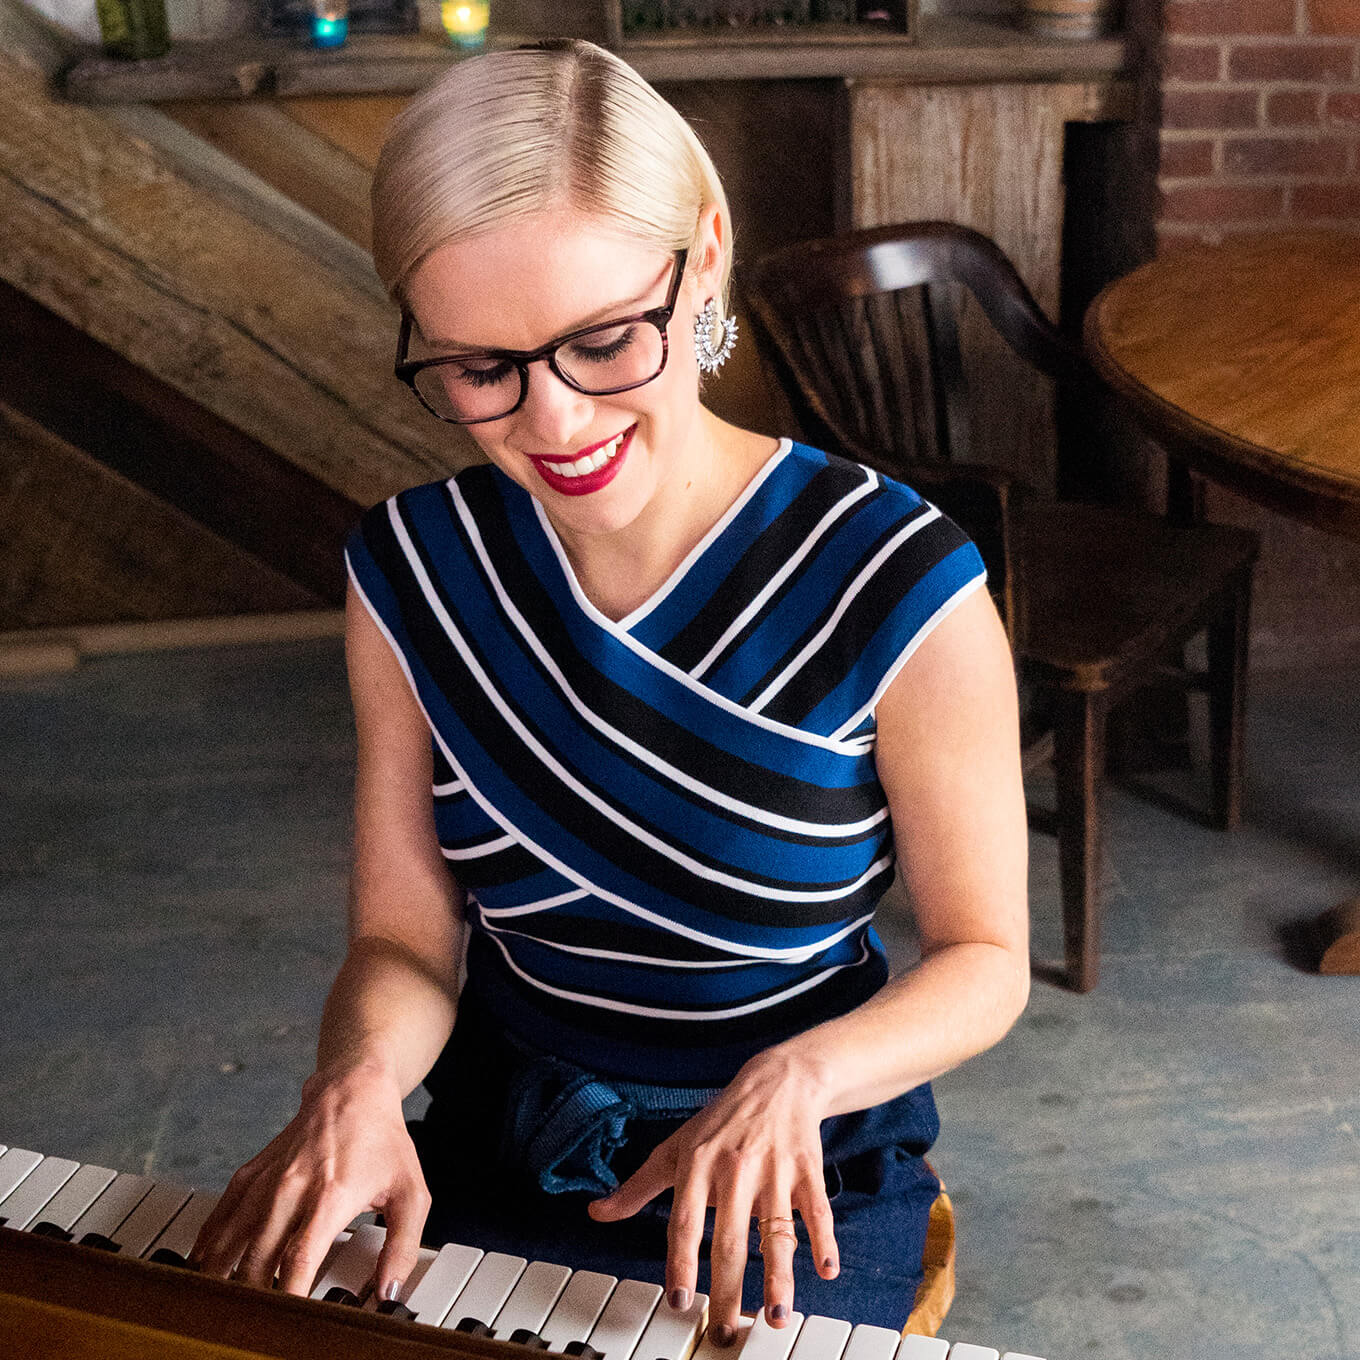 Brooklyn-based soul singer Grace Weber plays the piano wearing the Ain eyeglasses in purple tortoiseshell from the Zenni Metropolitan Collection.